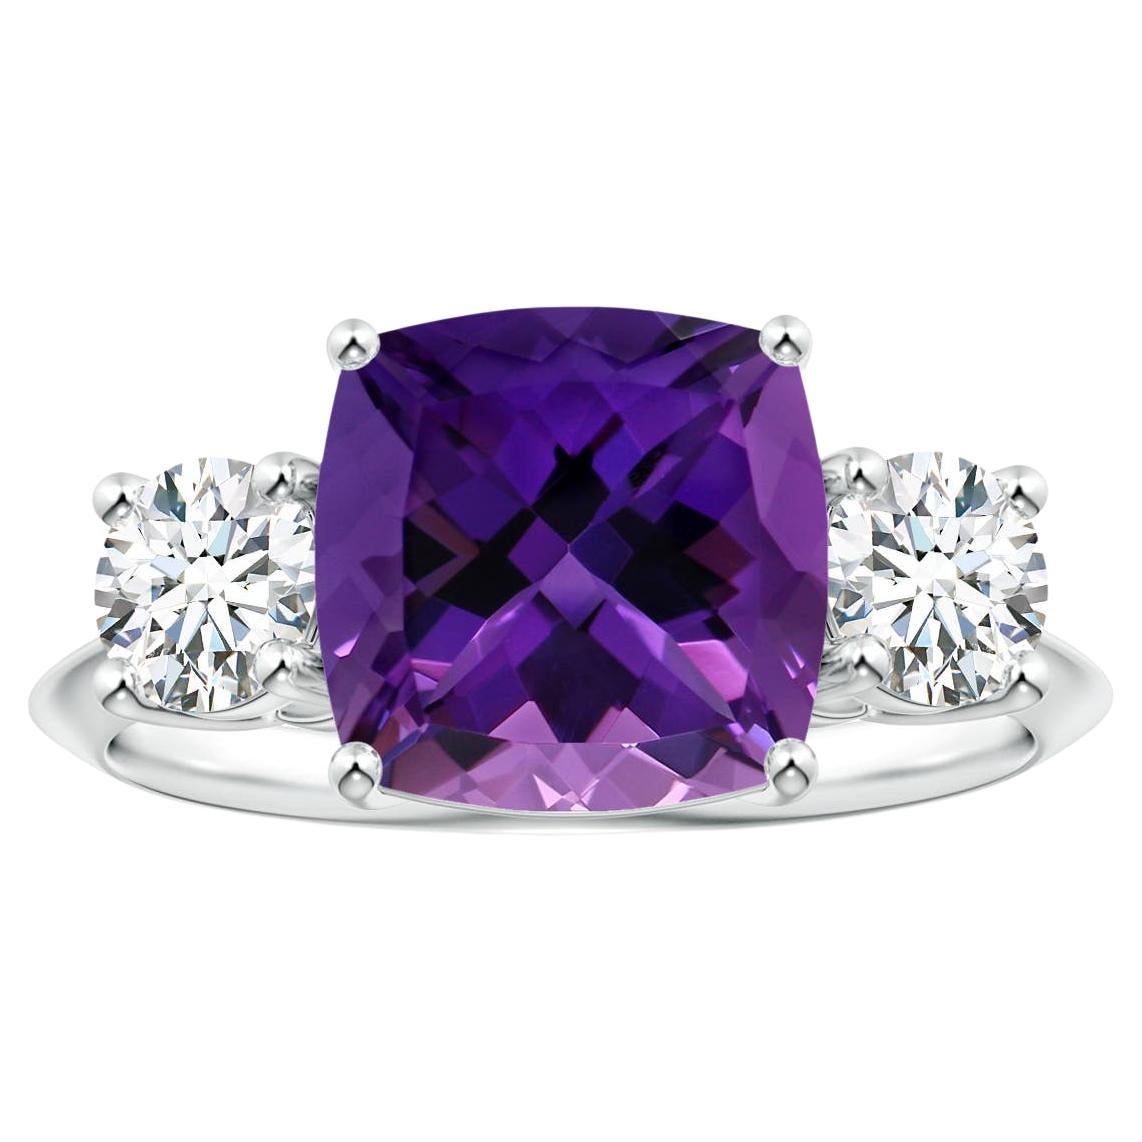 For Sale:  ANGARA 3-Stone GIA Certified Cushion Amethyst Ring in White Gold with Diamonds